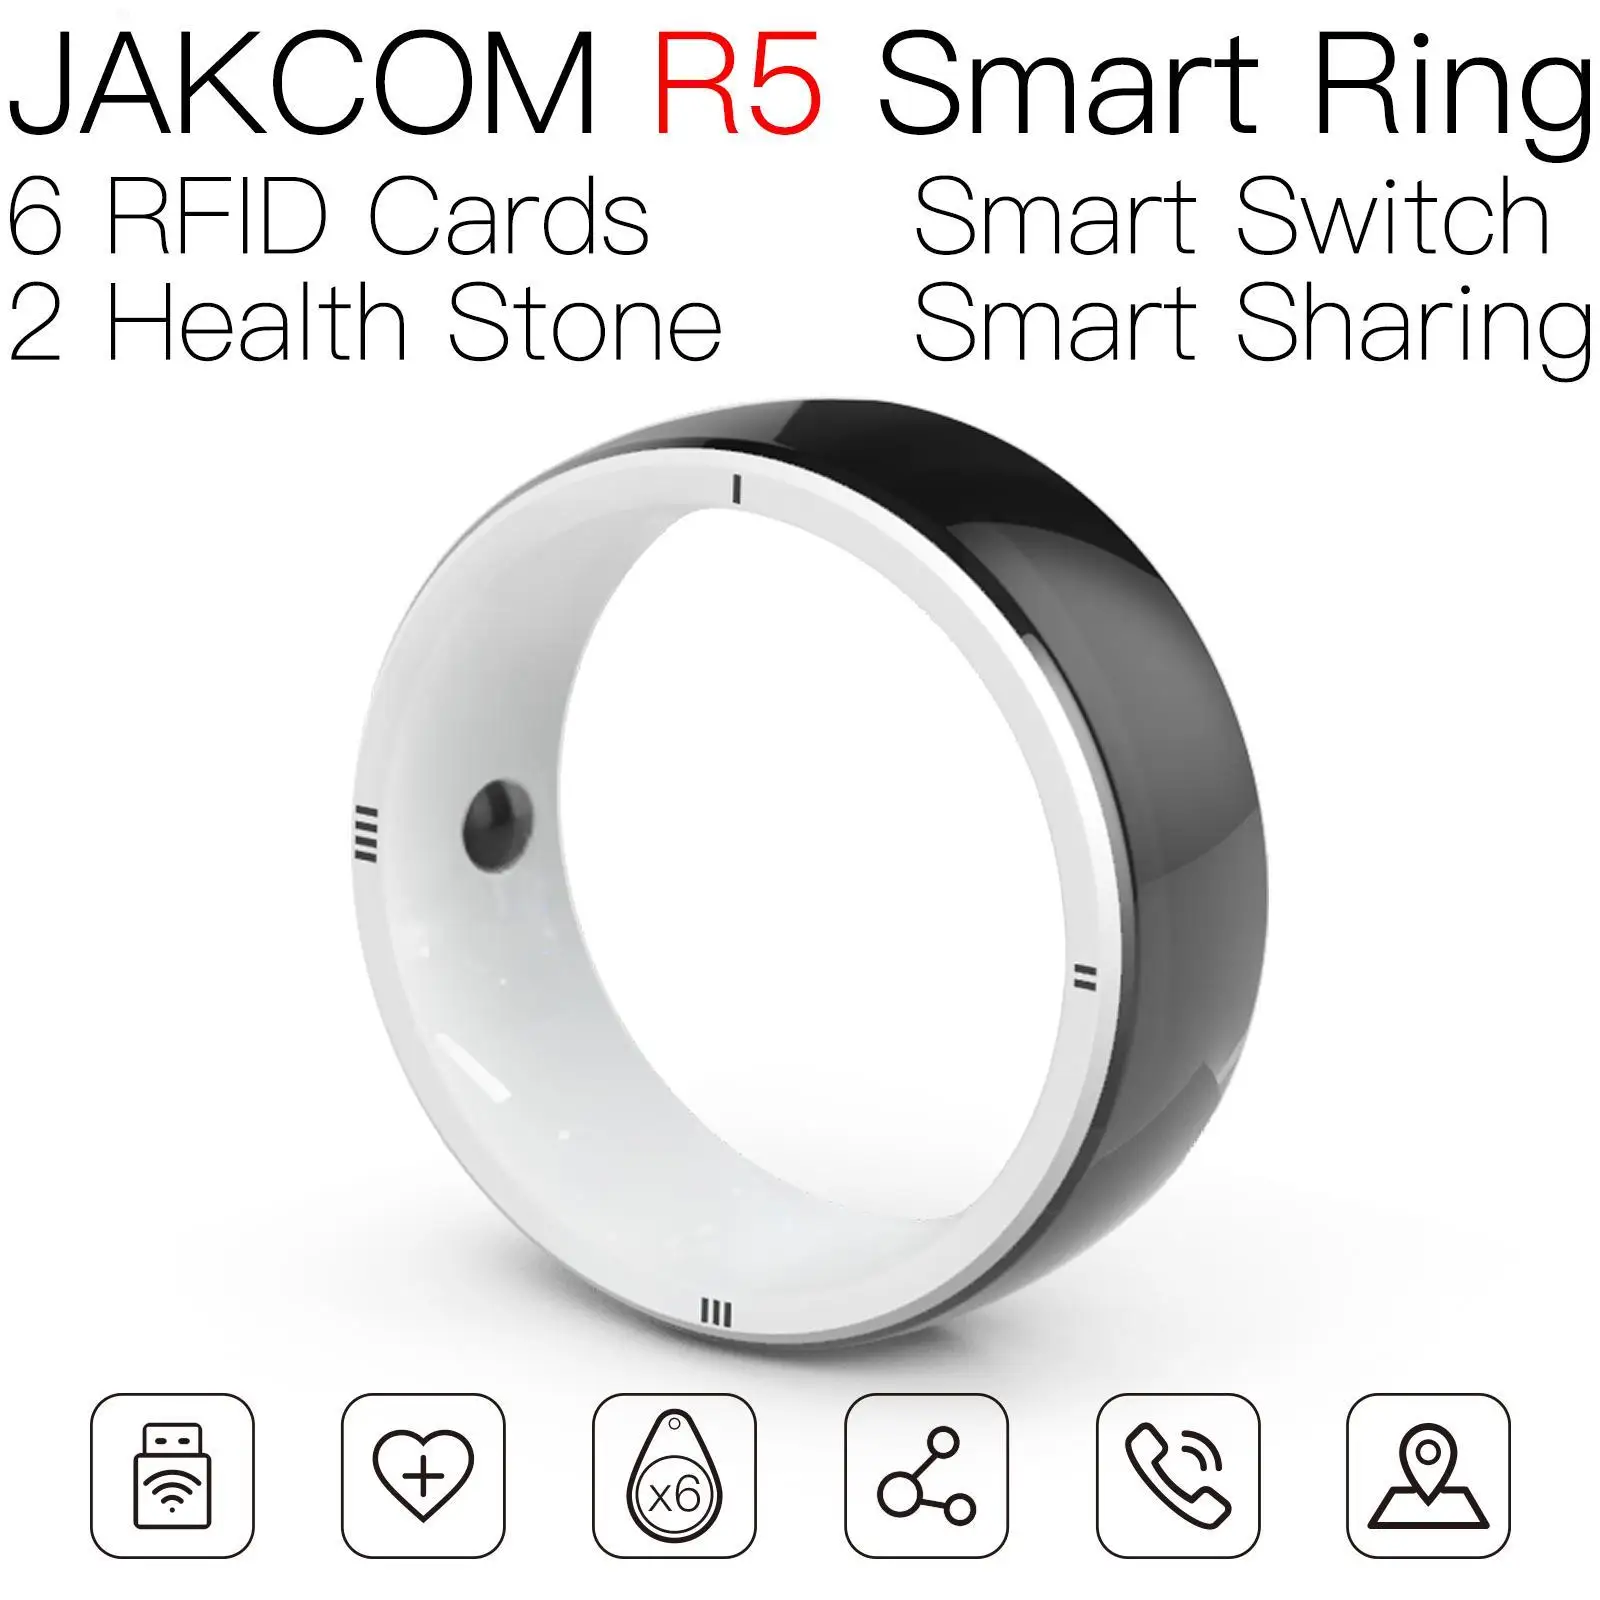 

JAKCOM R5 Smart Ring Match to nfc start switch iso fix adhesive ntag215 sticker rs232 can am stickers parking access